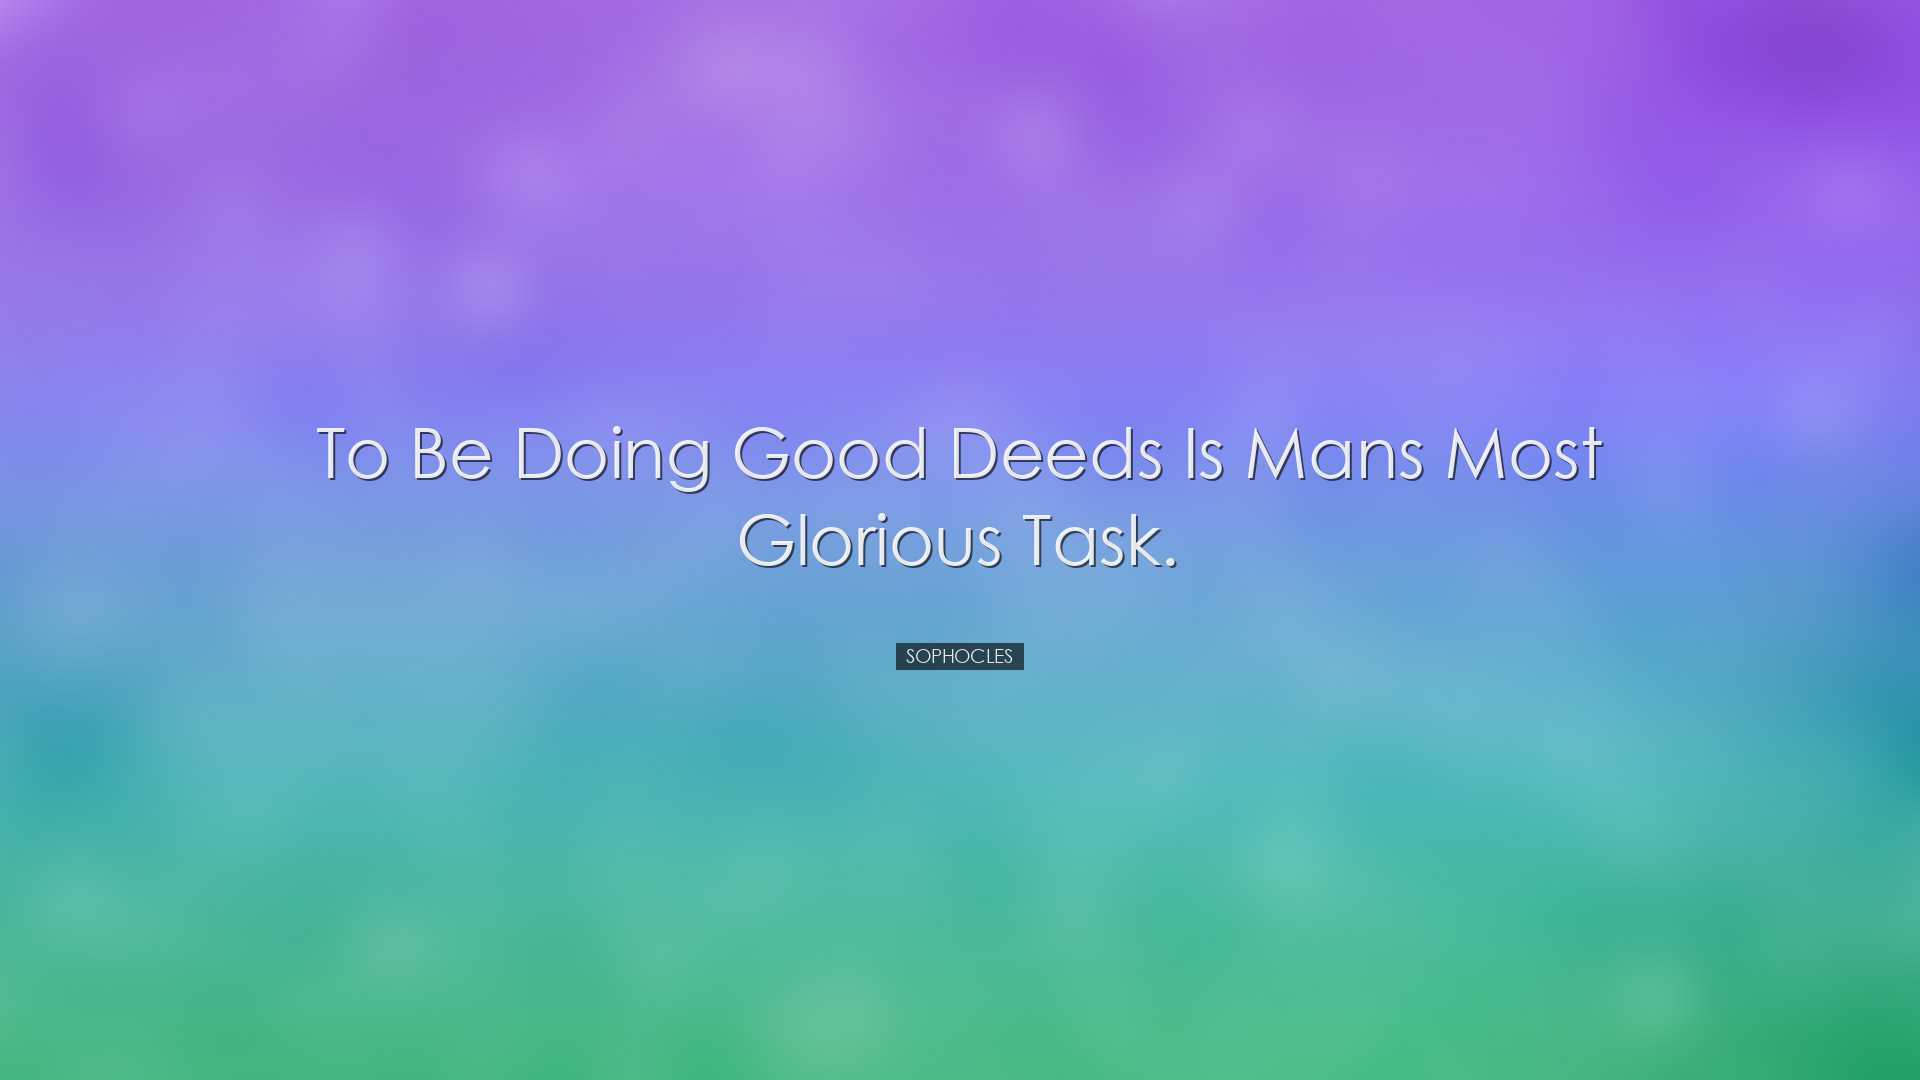 To be doing good deeds is mans most glorious task. - Sophocles